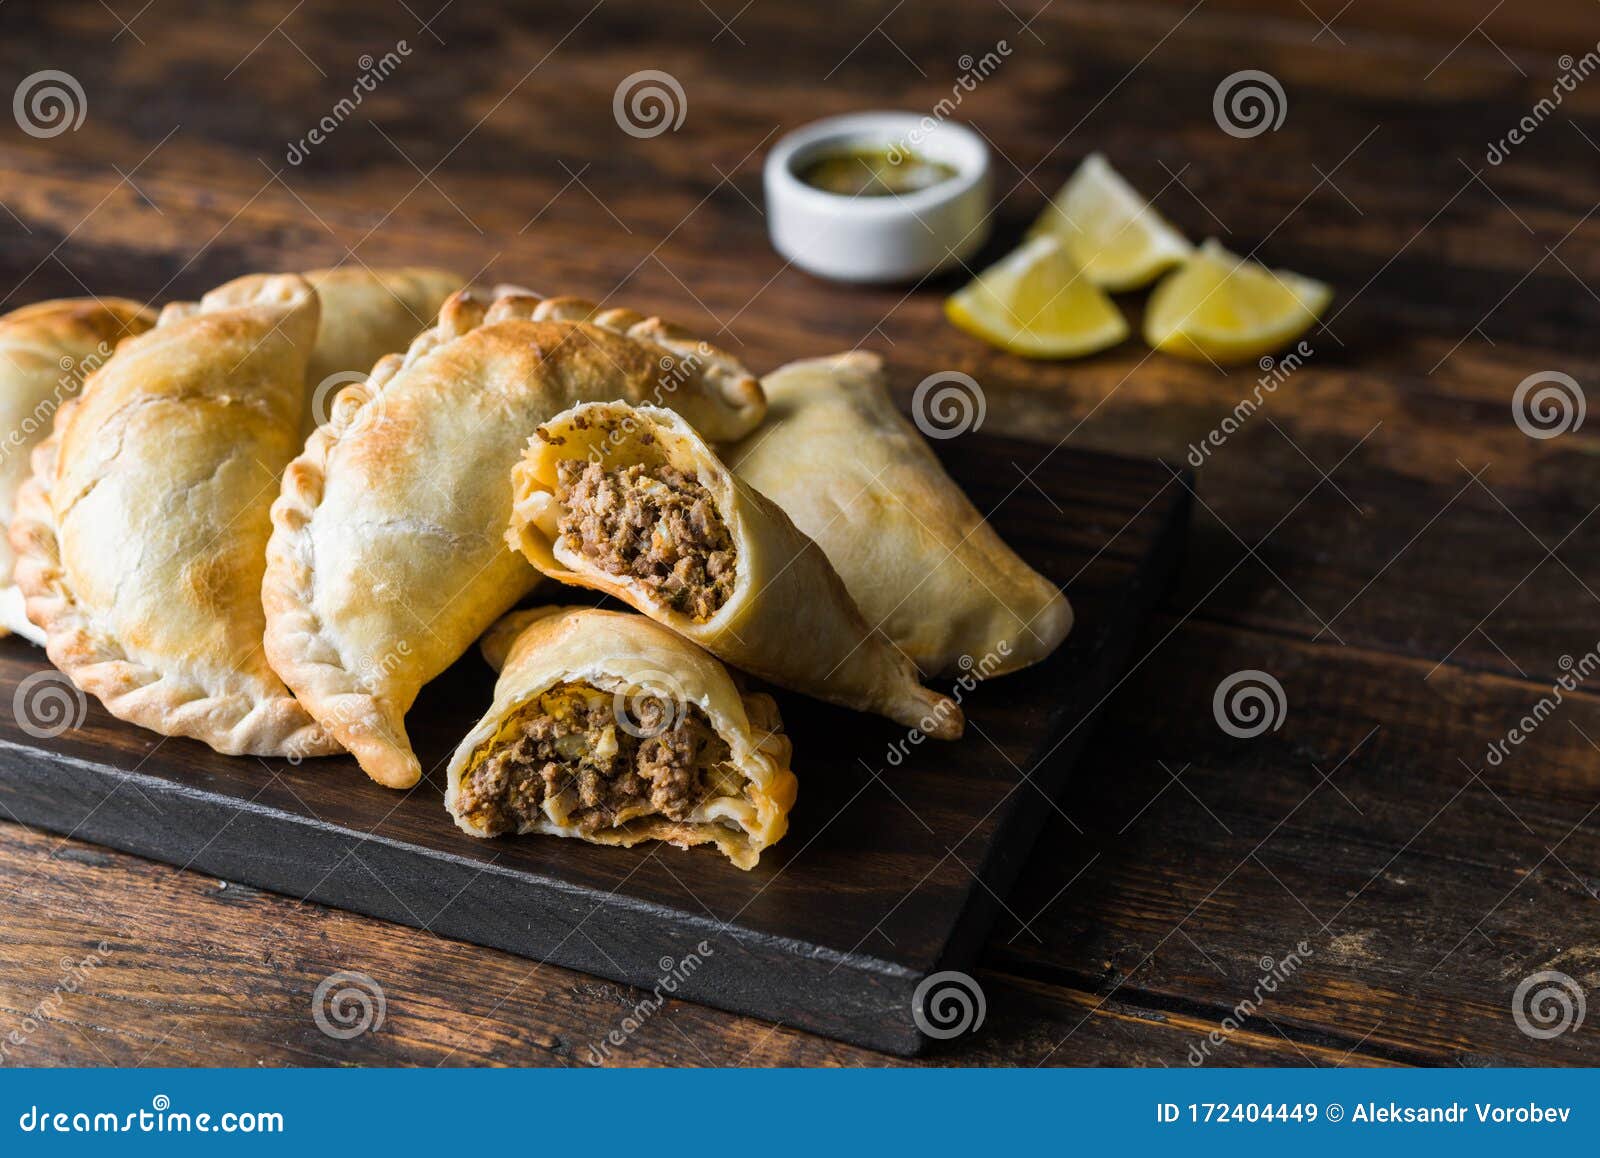 traditional baked argentine empanadas savoury pastries with beef stuffing.